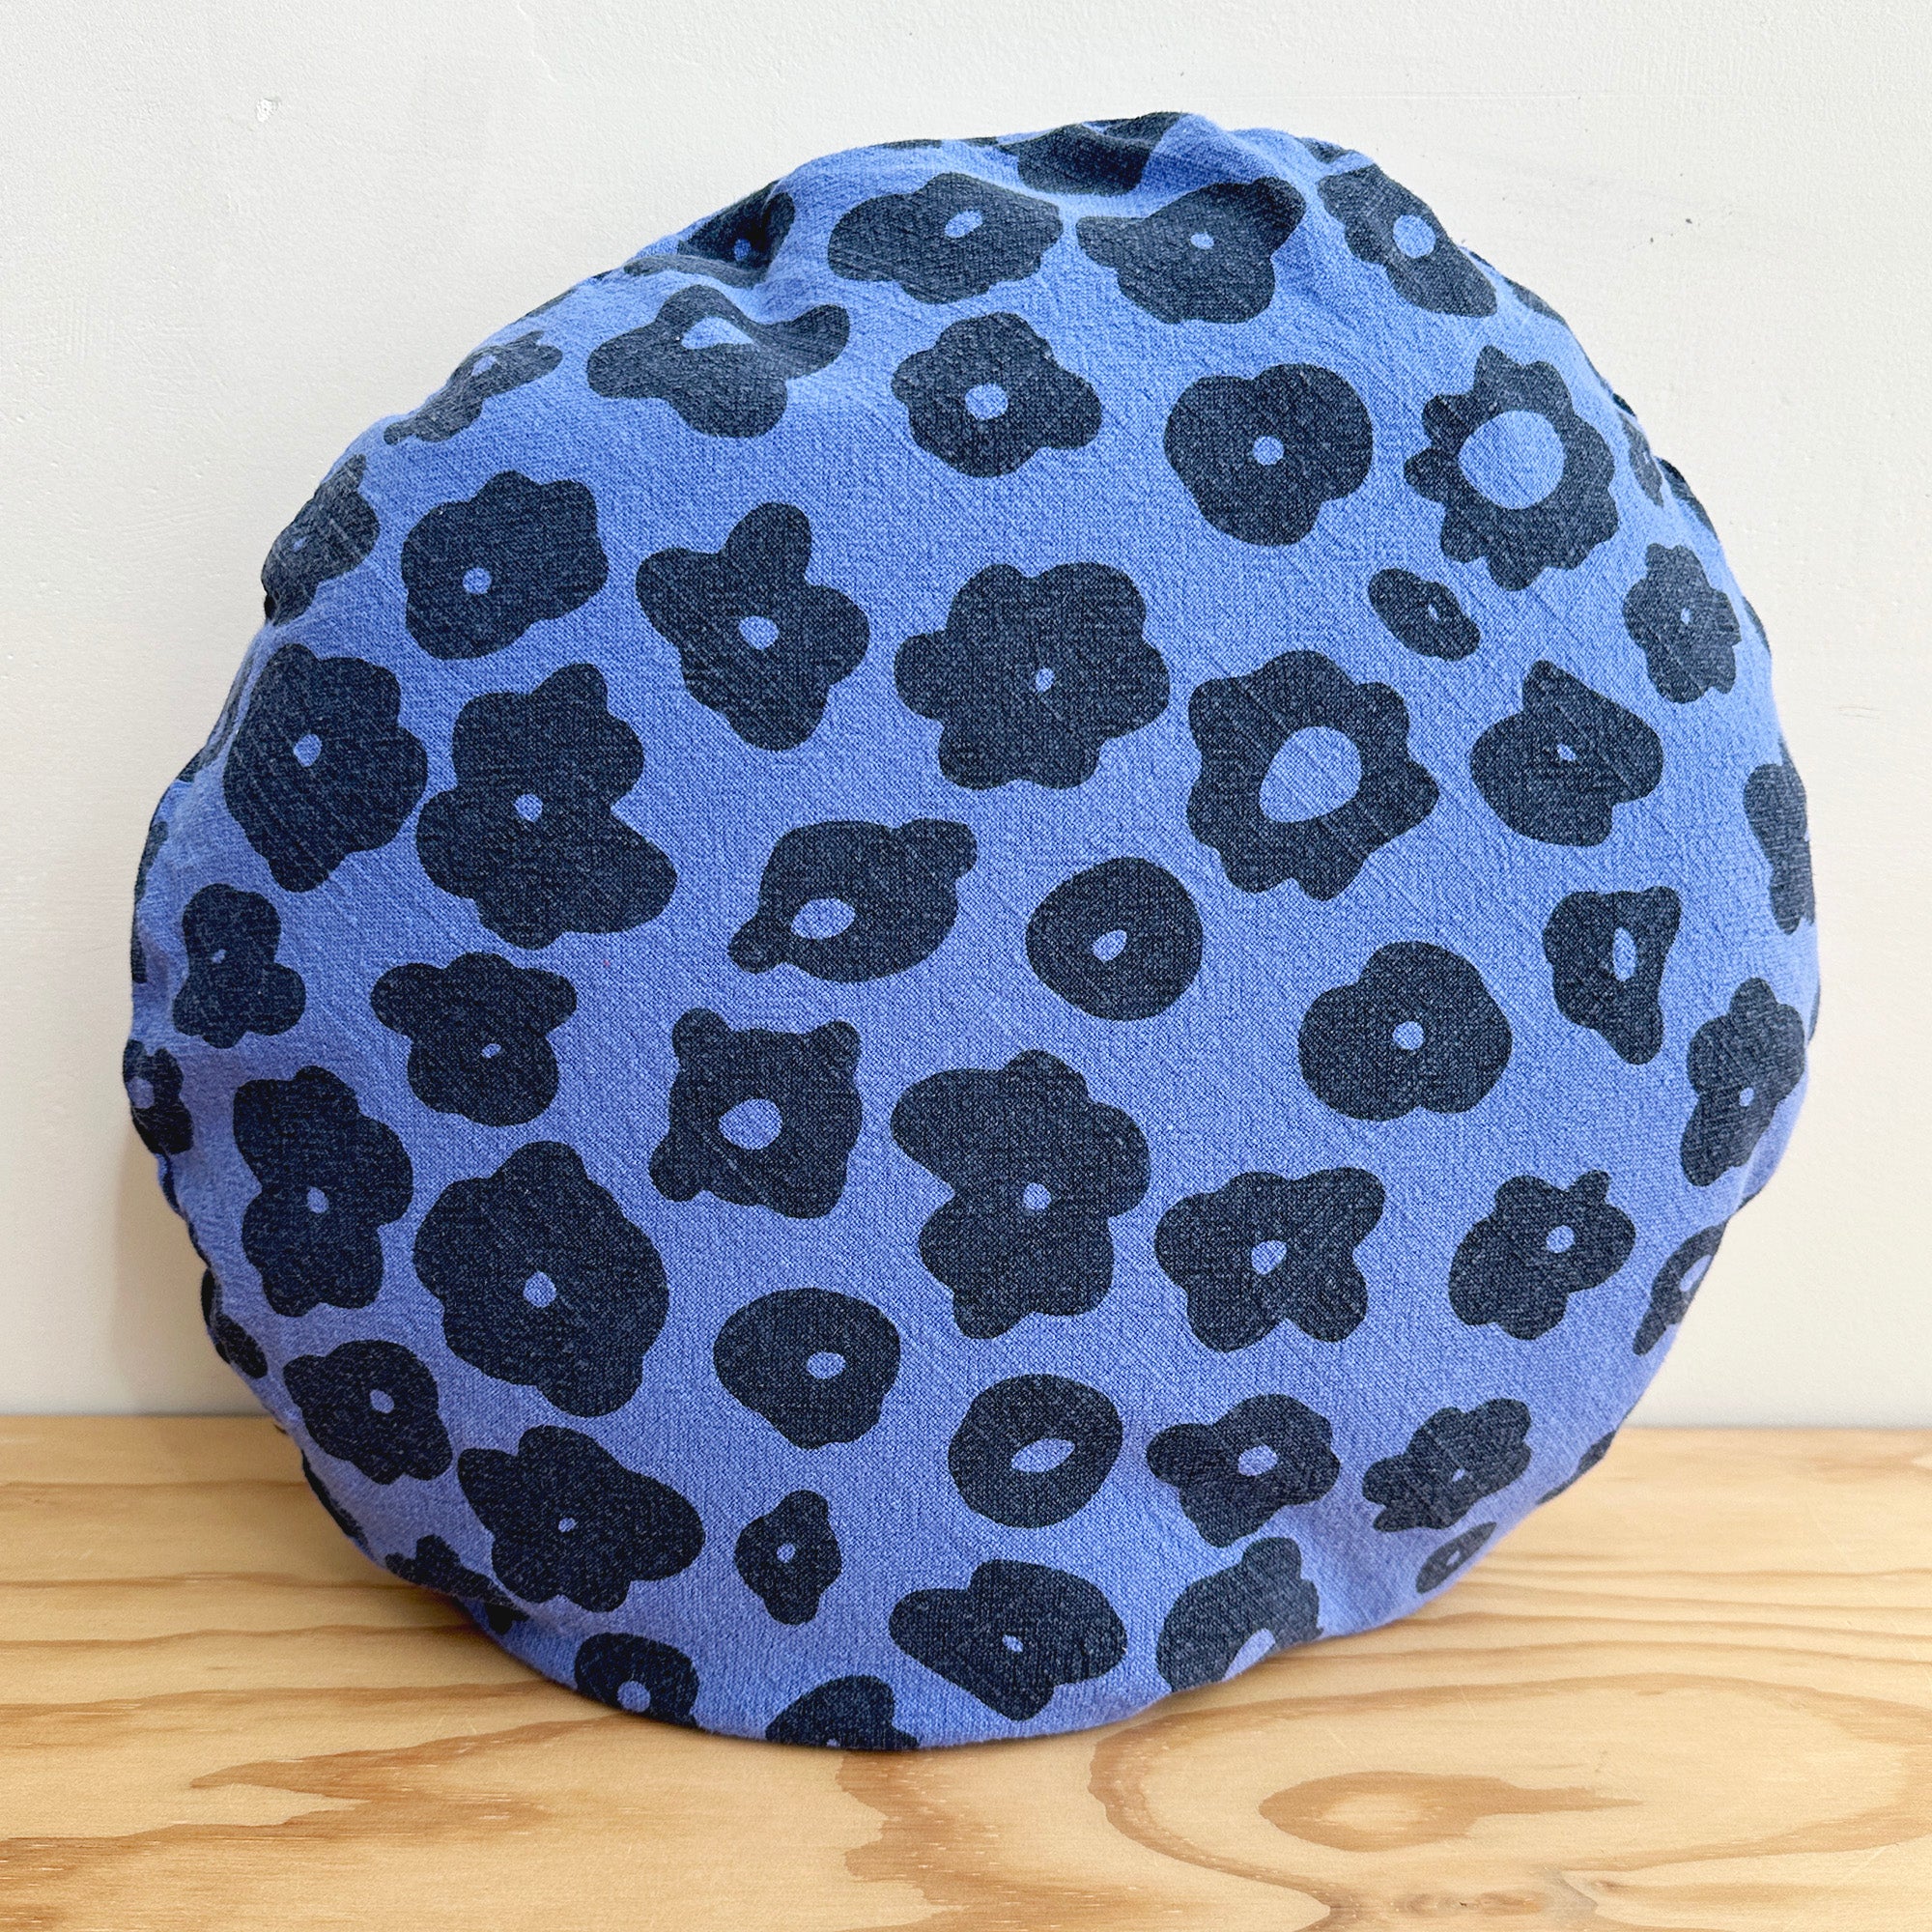 The Round Throw Pillow - Celeste in Faded Black and Periwinkle